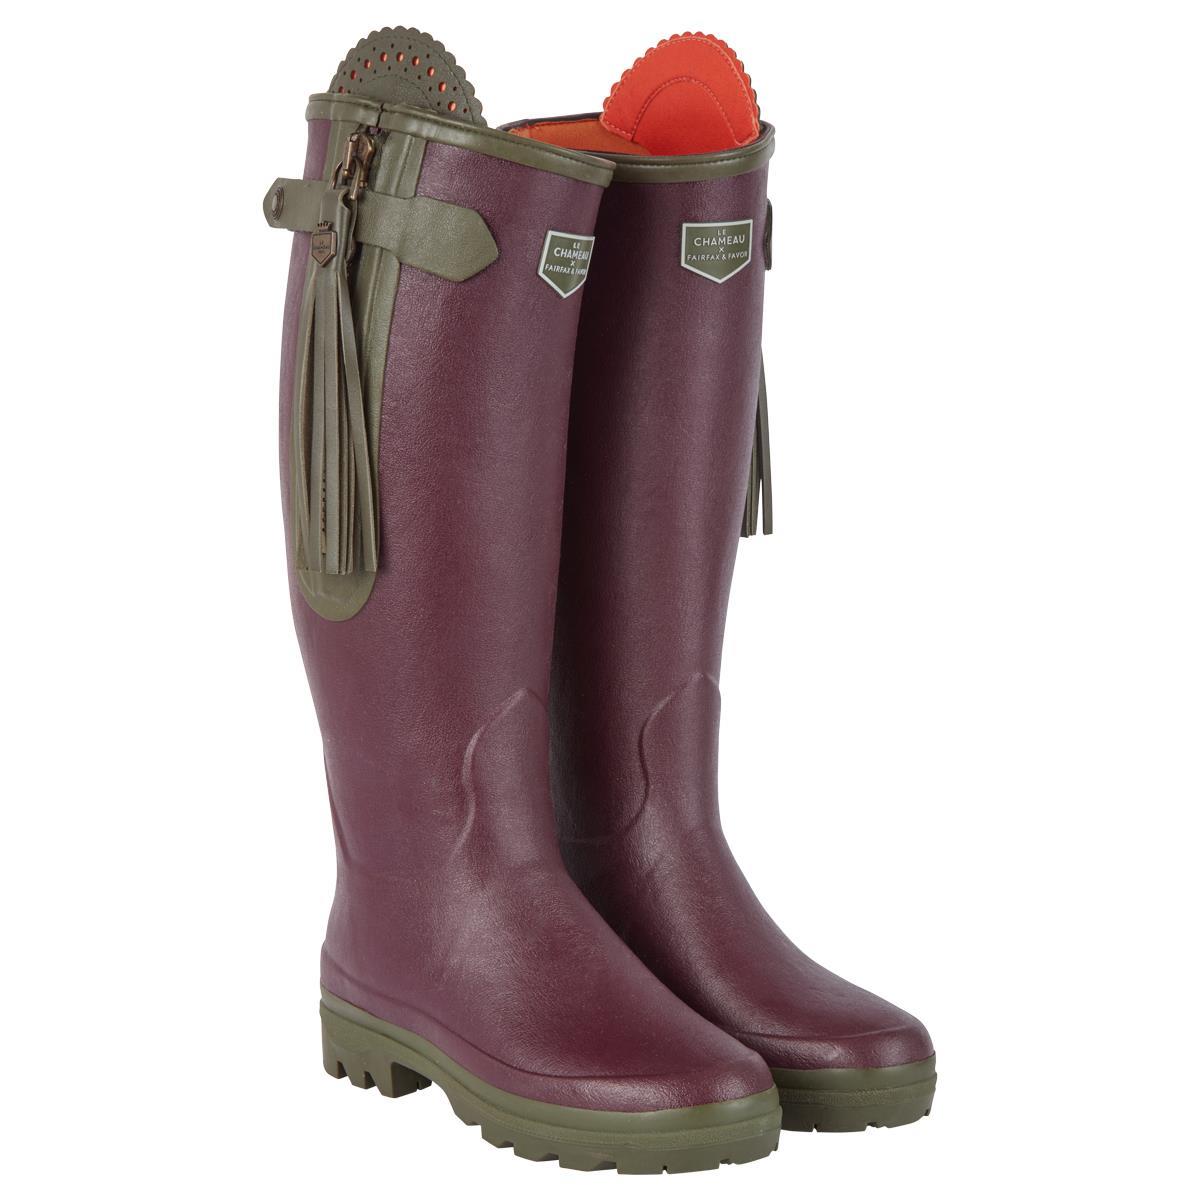 What are the main features of the L'Alliance Wellington Boot by Fairfax & Favor?